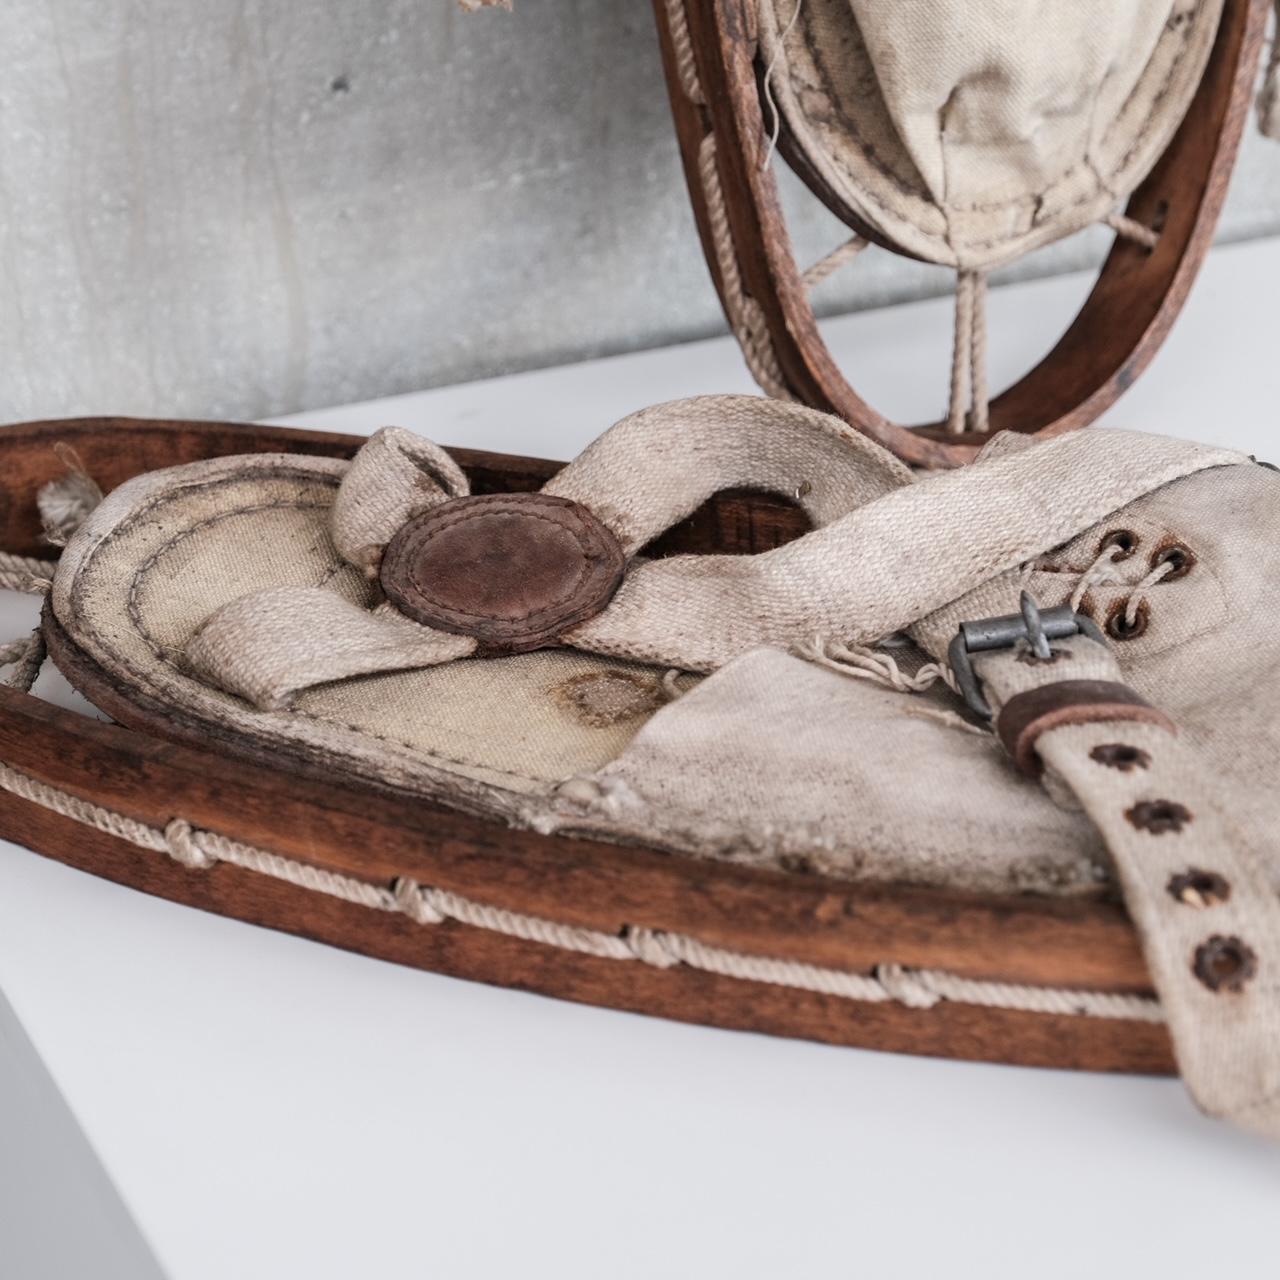 A pair of vintage unusual snow shoes, with wooden surrounds and sprung string design.

France, circa 1930s.

Good vintage condition, but for use as a prop only we would suggest.

Ideal as the final touch for a ski chalet project or